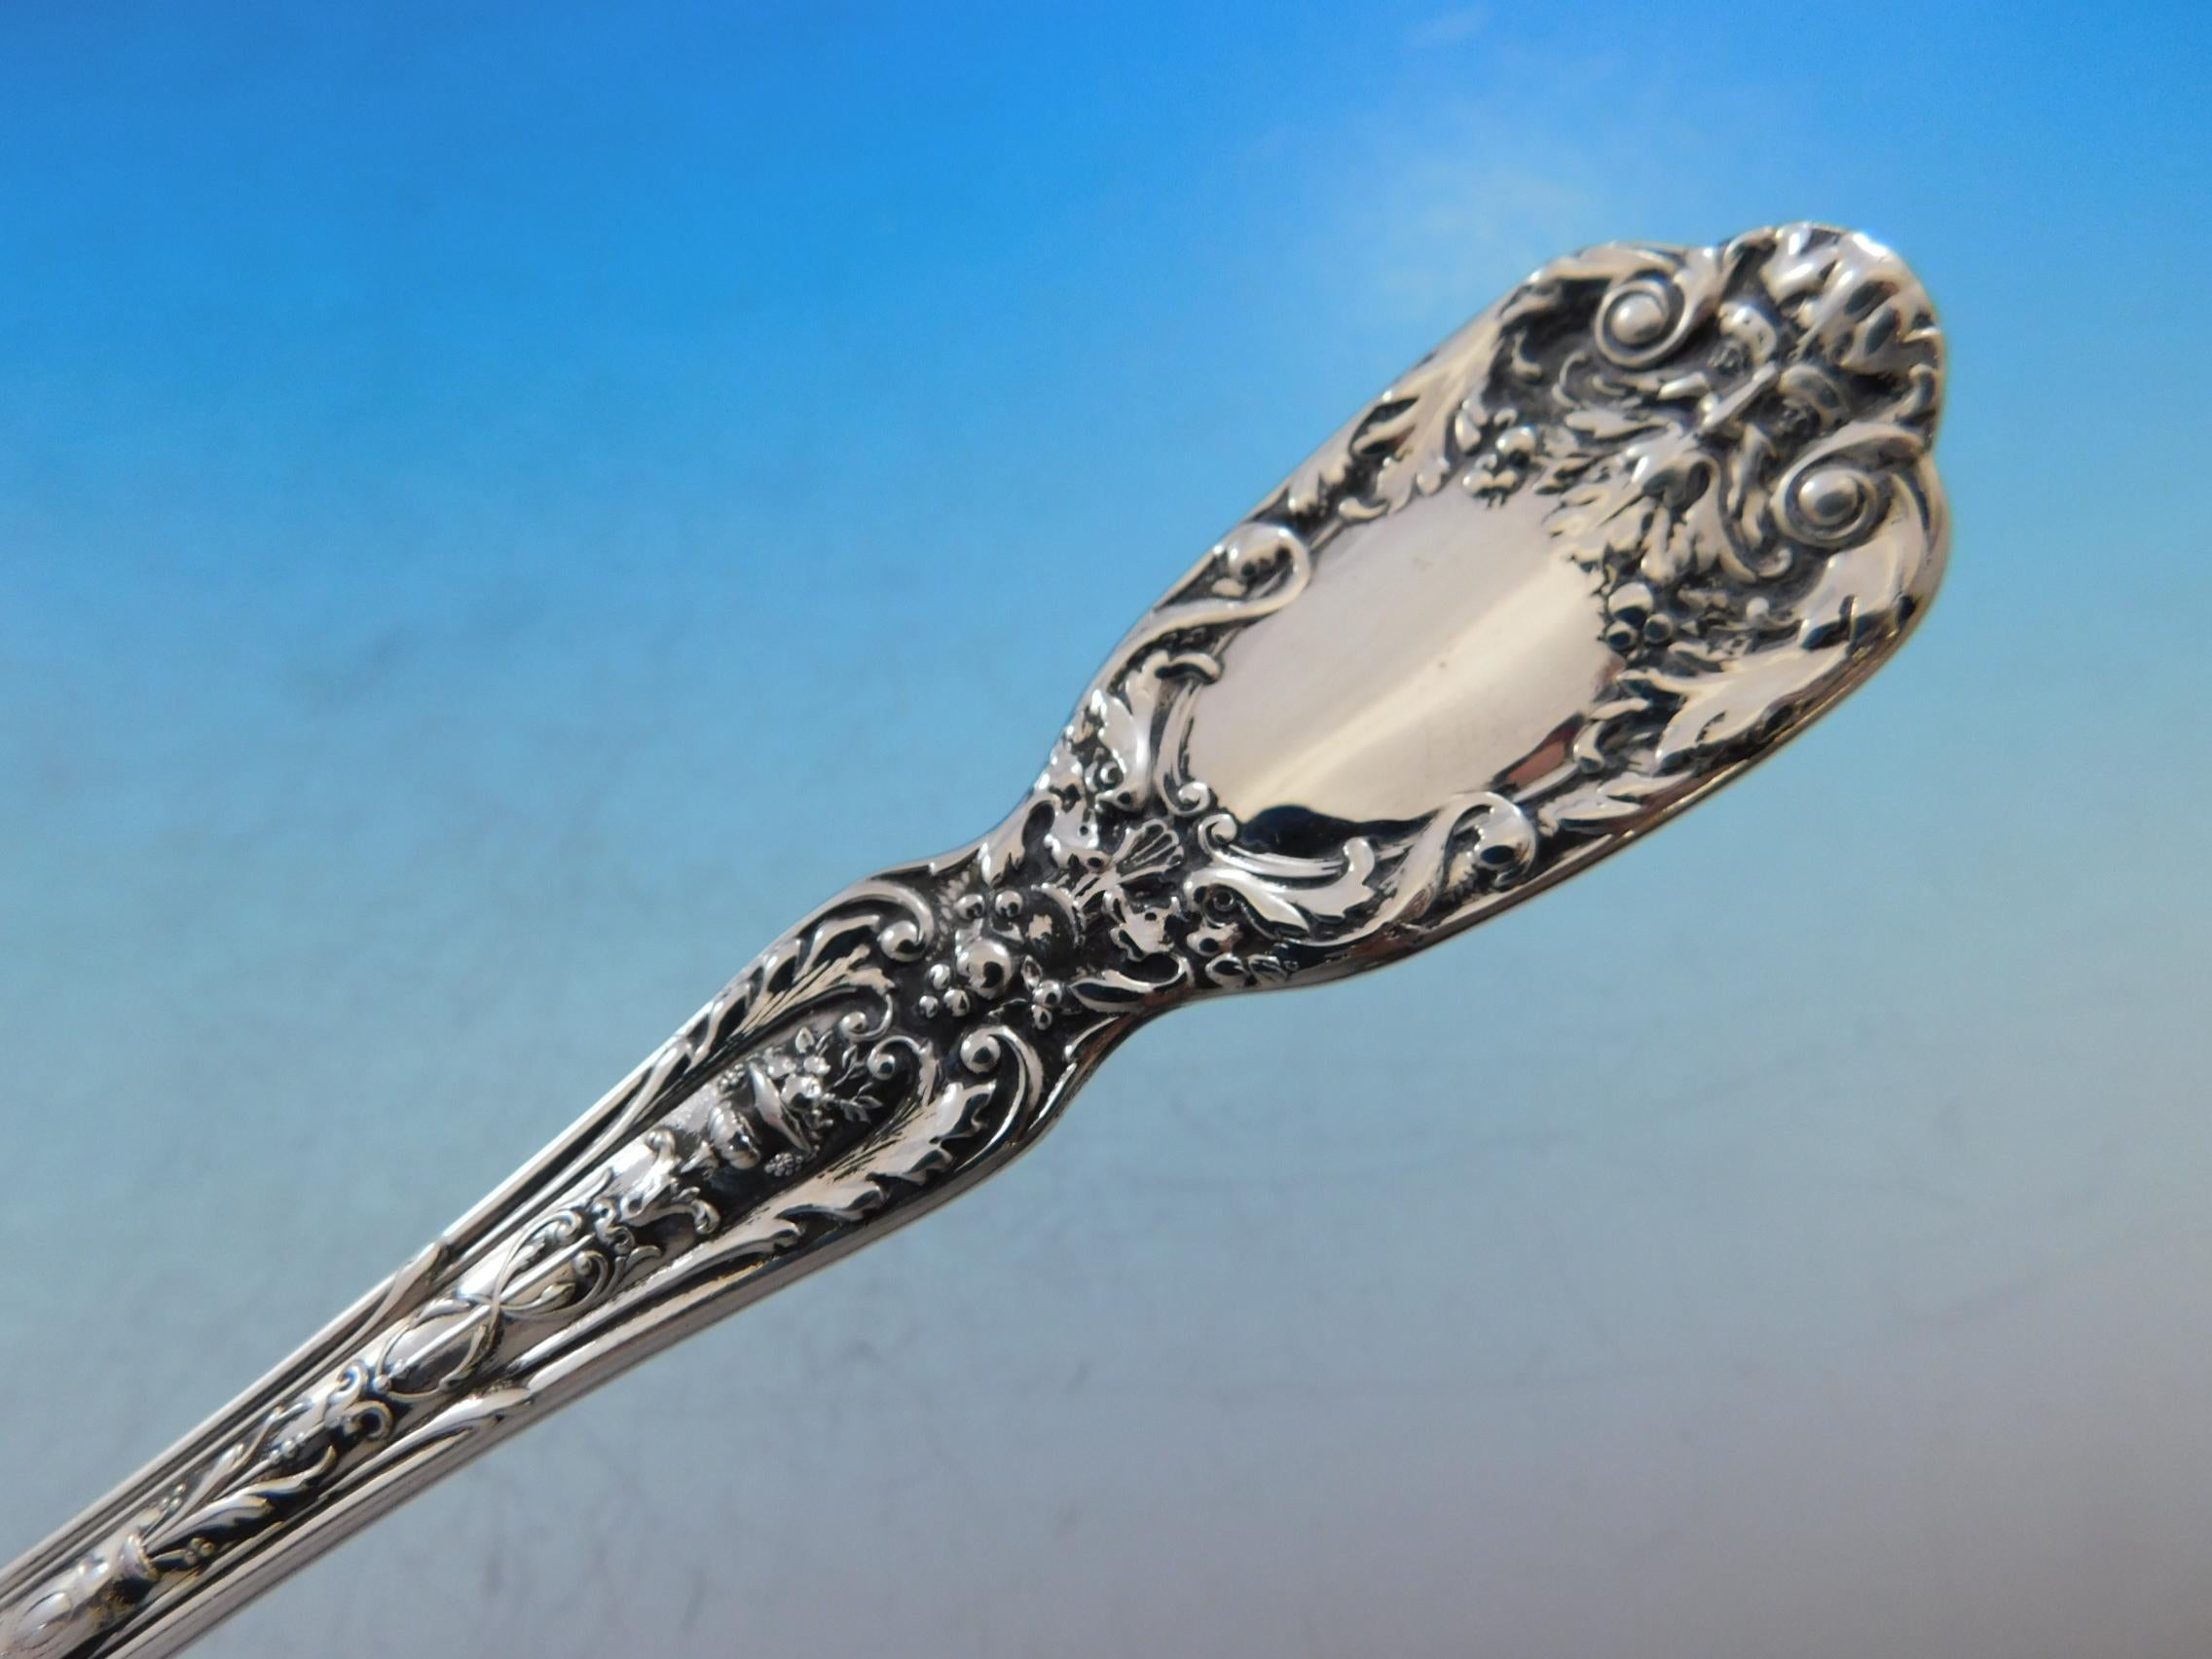 Argent sterling Florentine by Gorham Sterling Silver Flatware Service with Provenance 426 Pieces (service de couverts en argent sterling) en vente